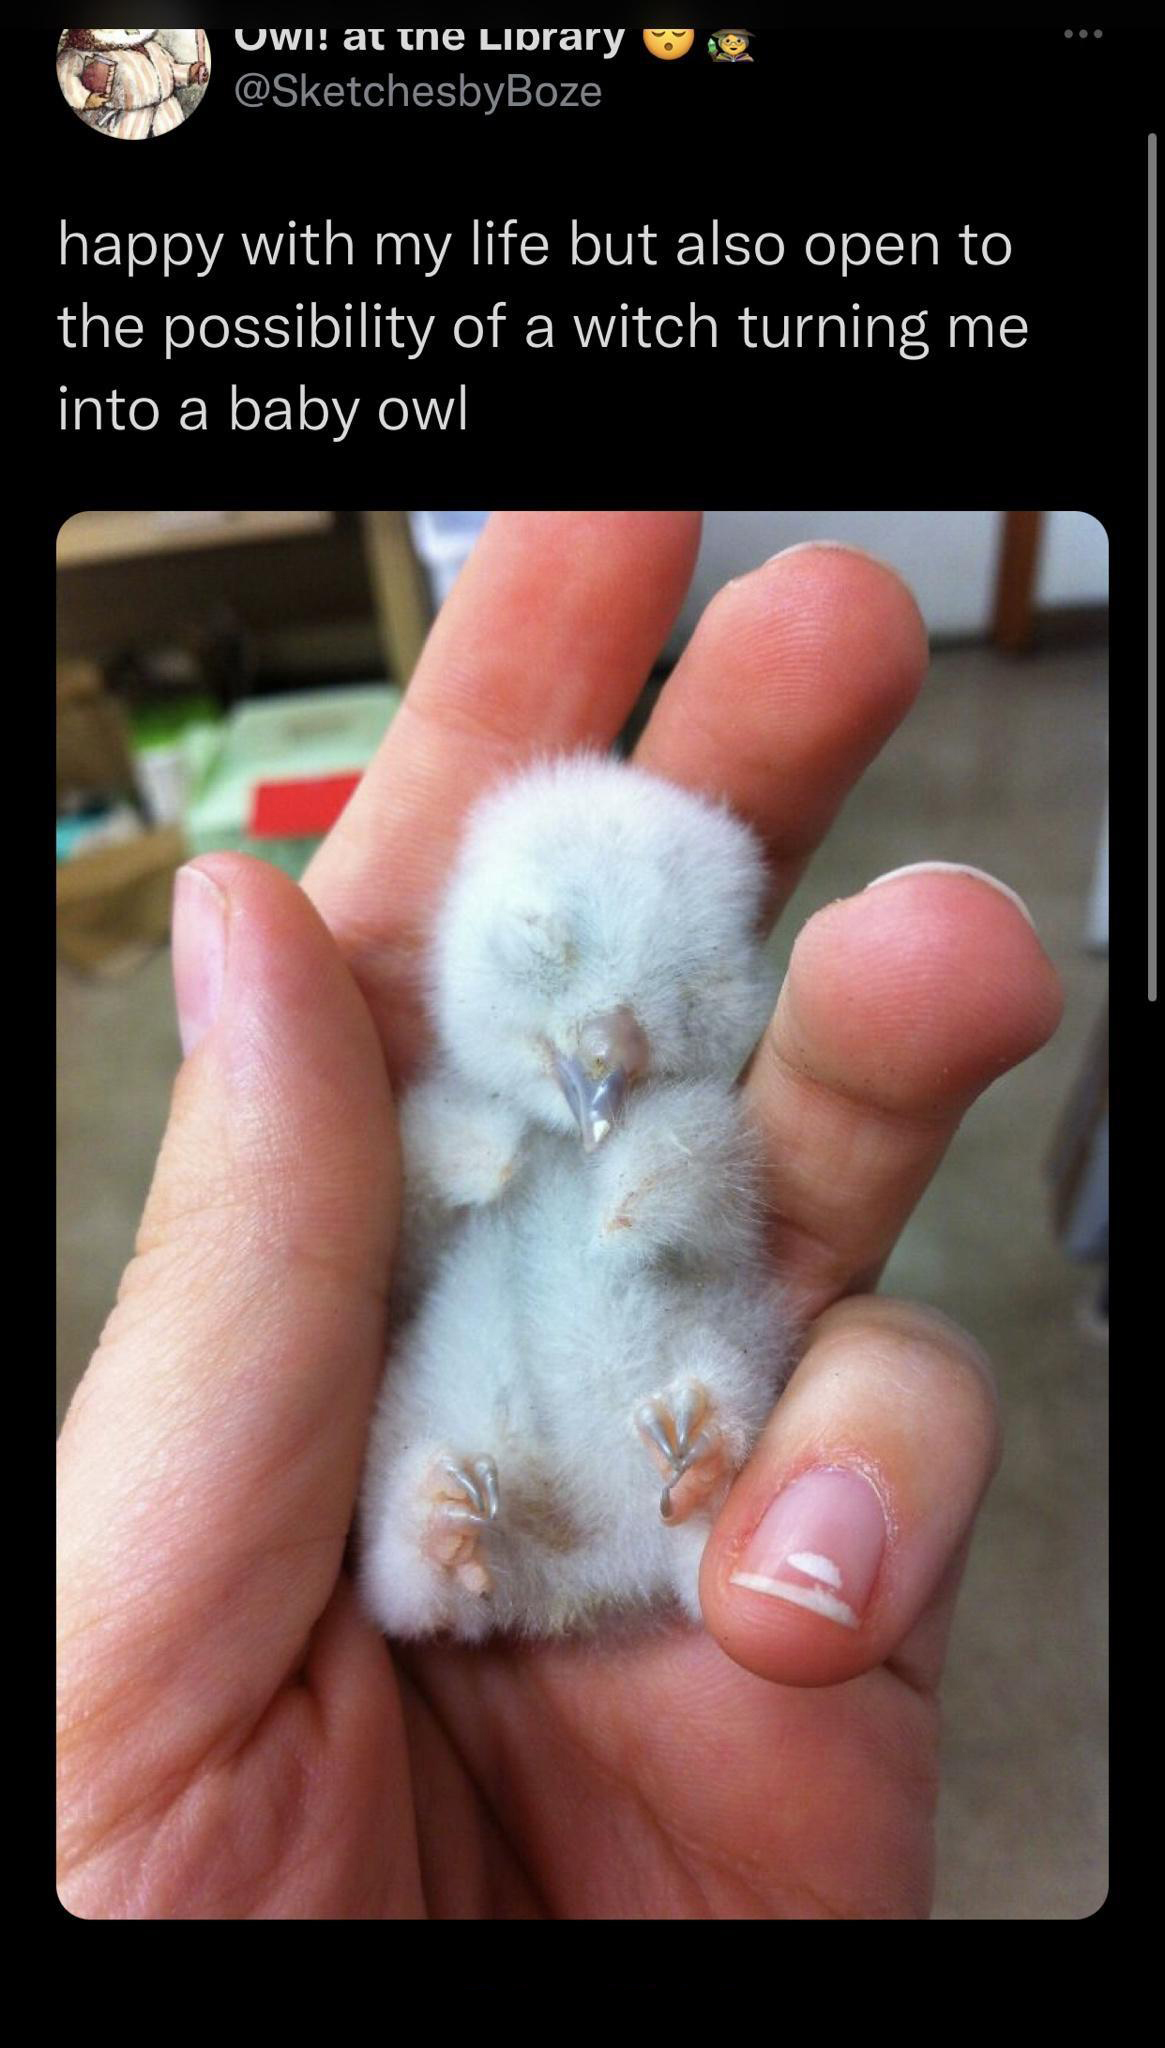 funny tweets - newborn owl - Uw at the Library happy with my life but also open to the possibility of a witch turning me into a baby owl